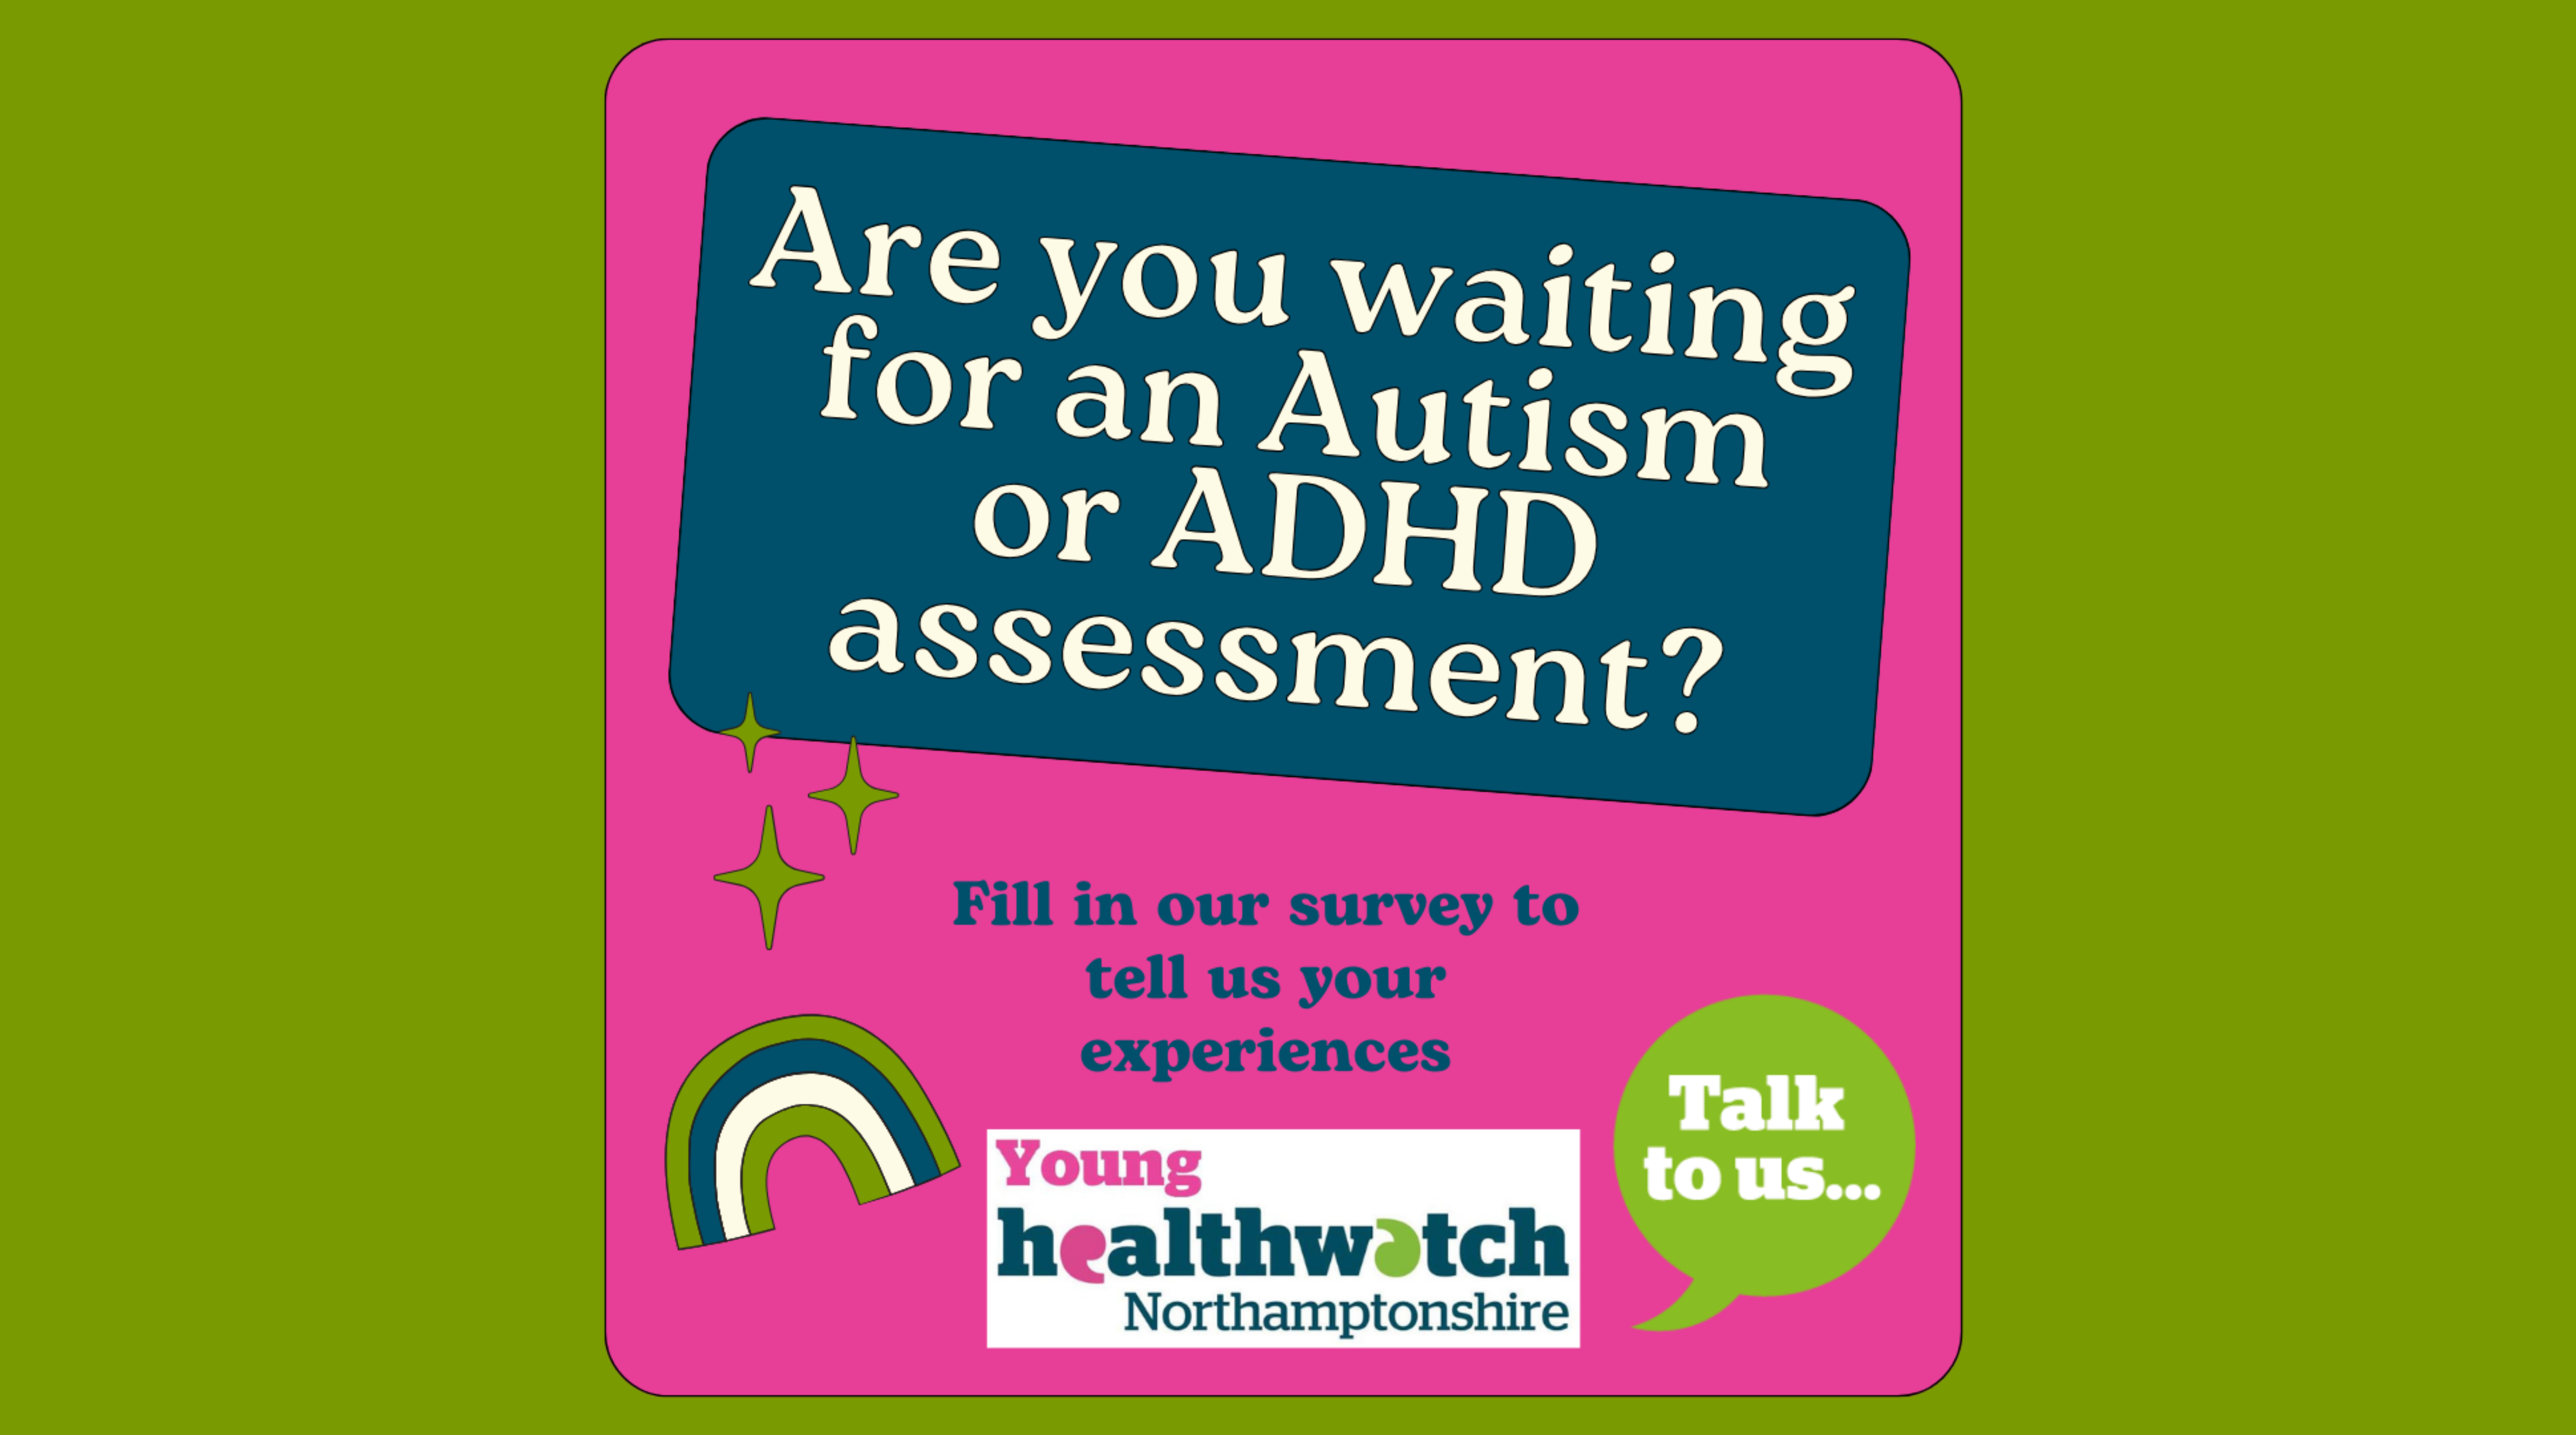 Are you waiting for an Autism or ADHD assessment? Fill in our survey to tell us your experiences.